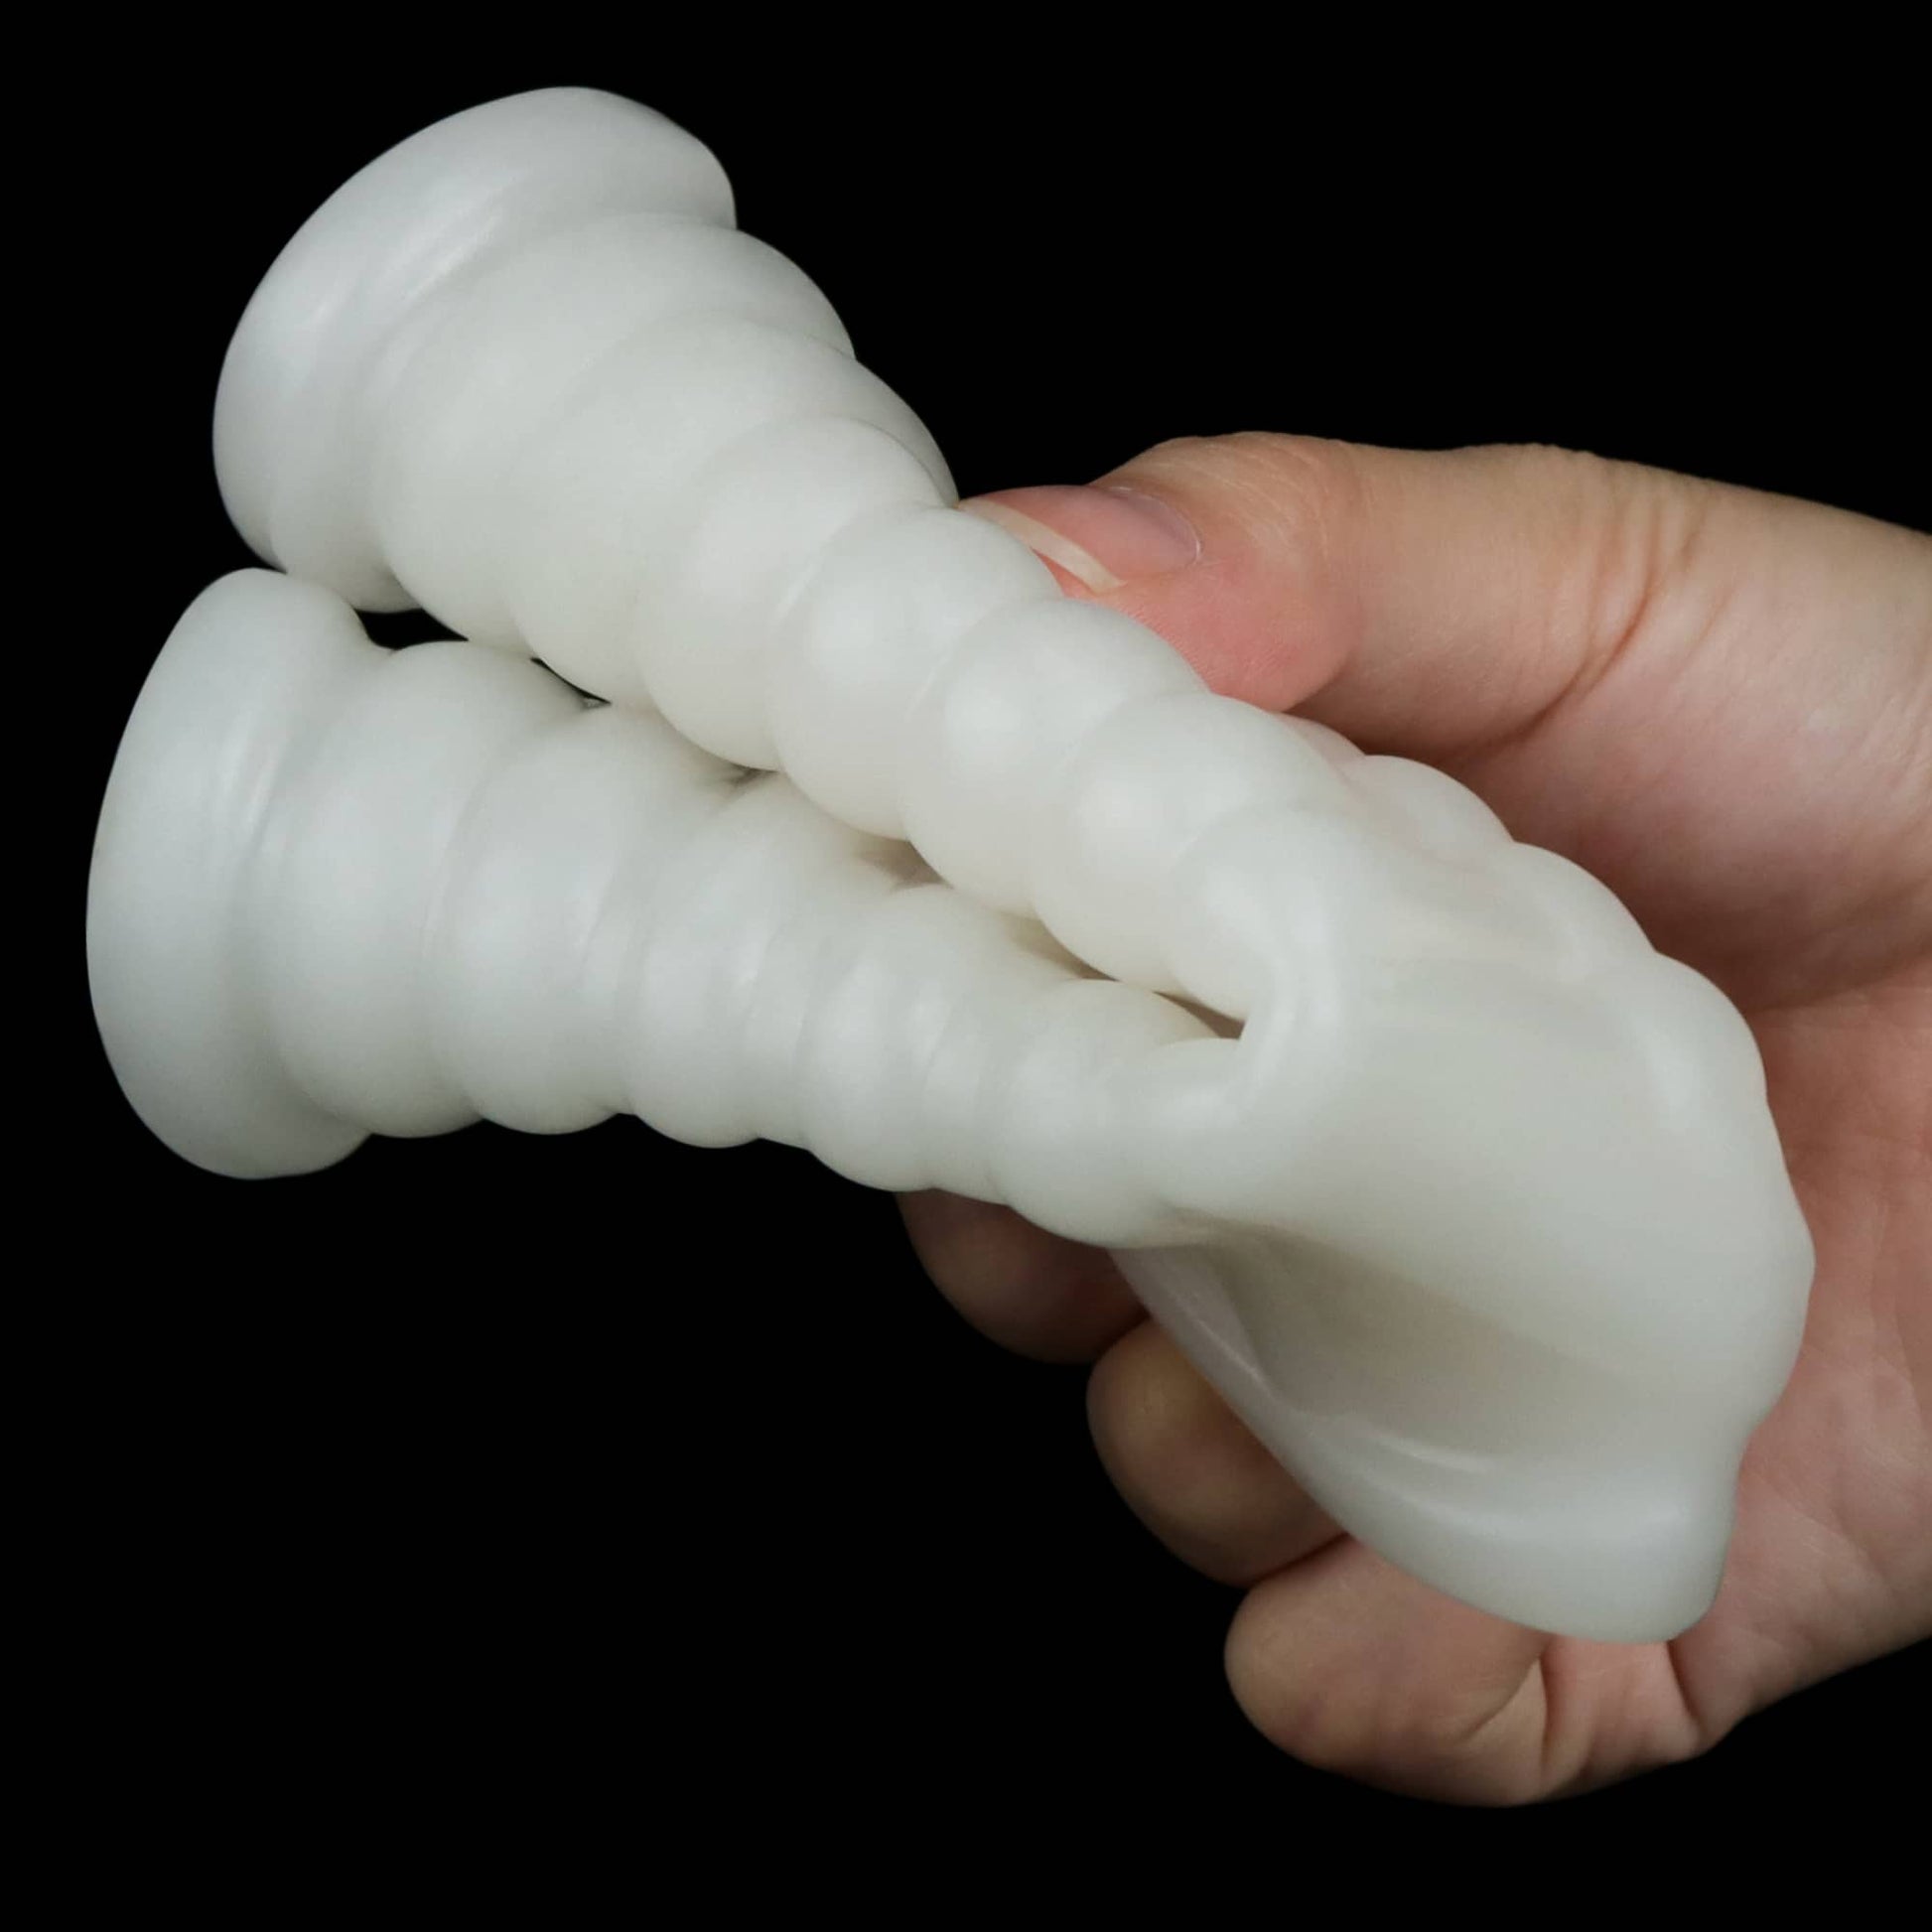 The wave vibrating knights ring with scrotum sleeve is easily pull or fold